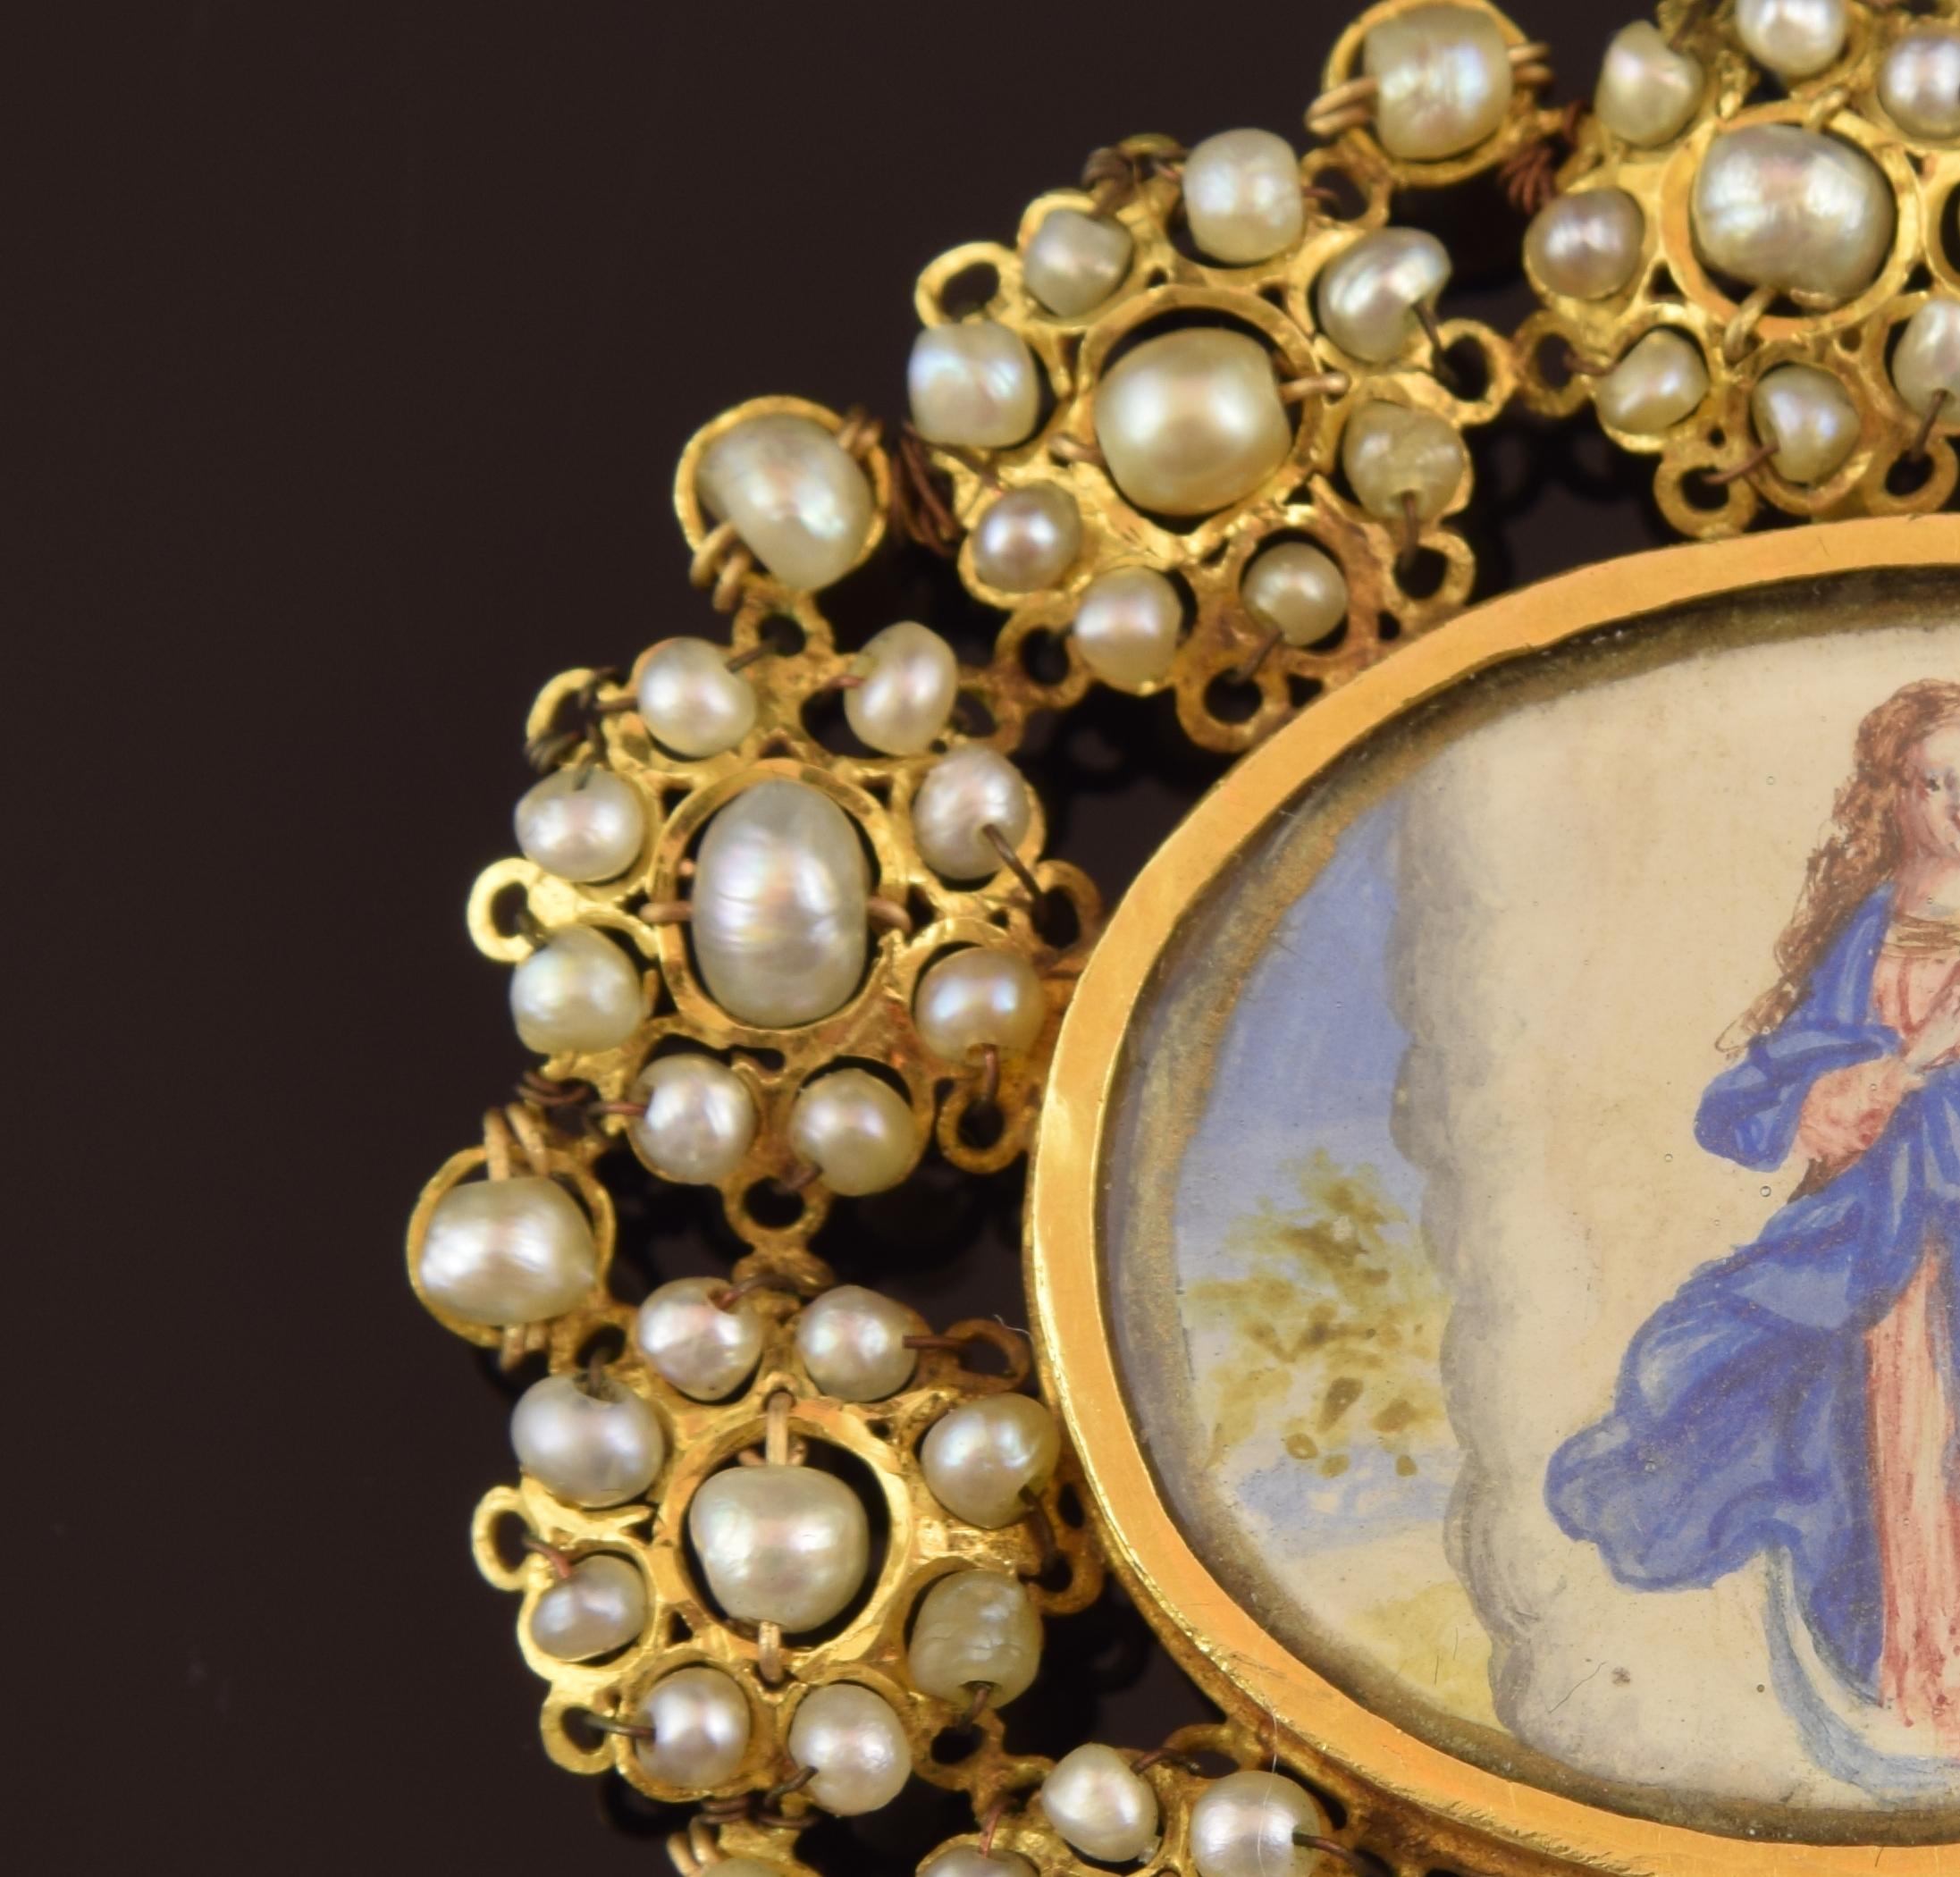 Neoclassical Gold and Pearls Devotional Pendant, 18th Century